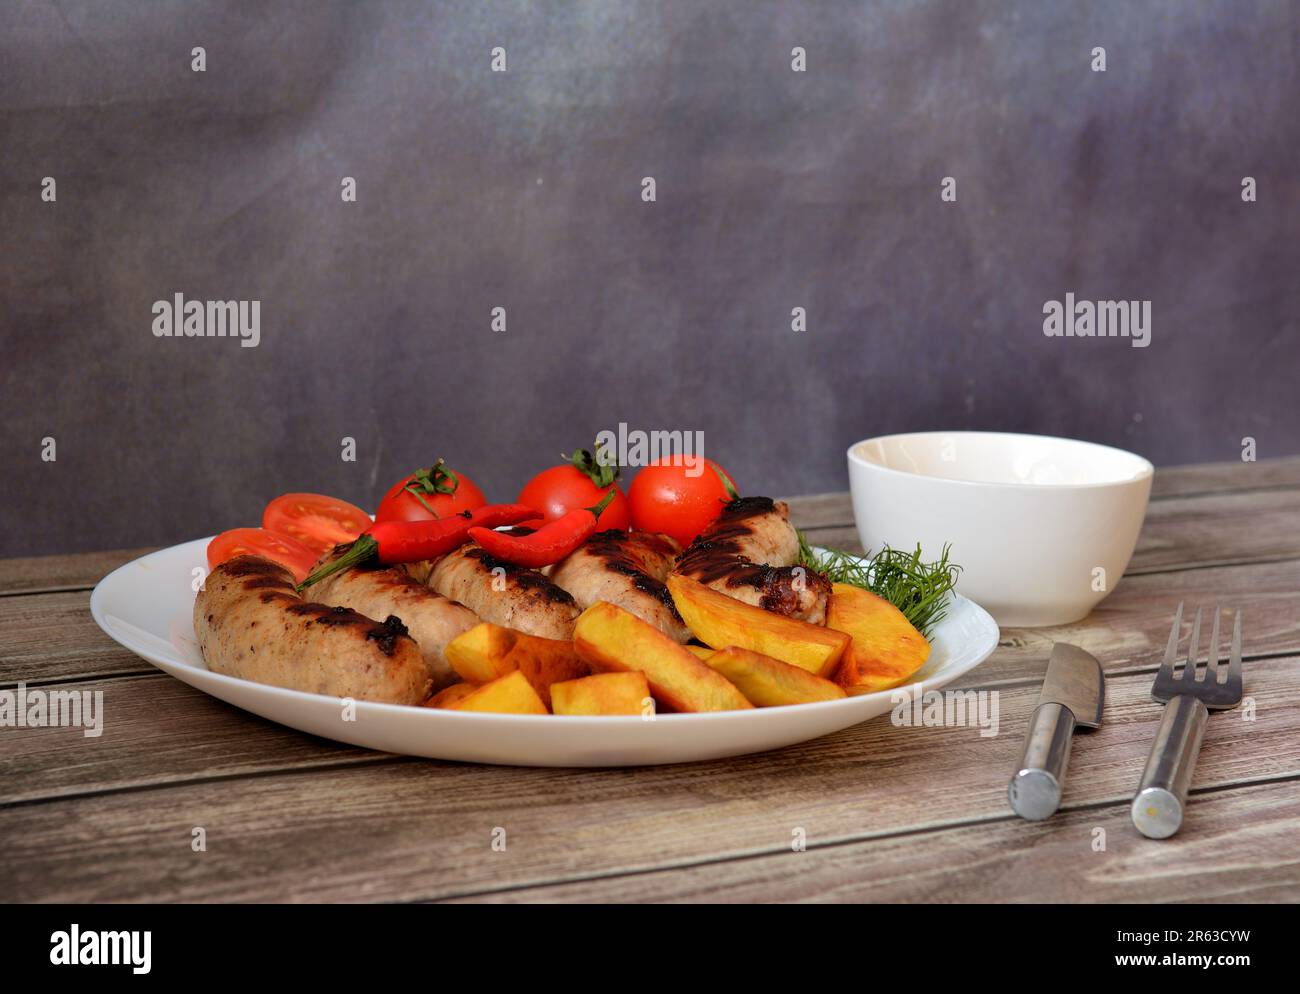 A white ceramic plate with grilled sausages, cherry tomatoes, fried potatoes and herbs on a wooden table, next to it is a gravy boat, a fork and a kni Stock Photo